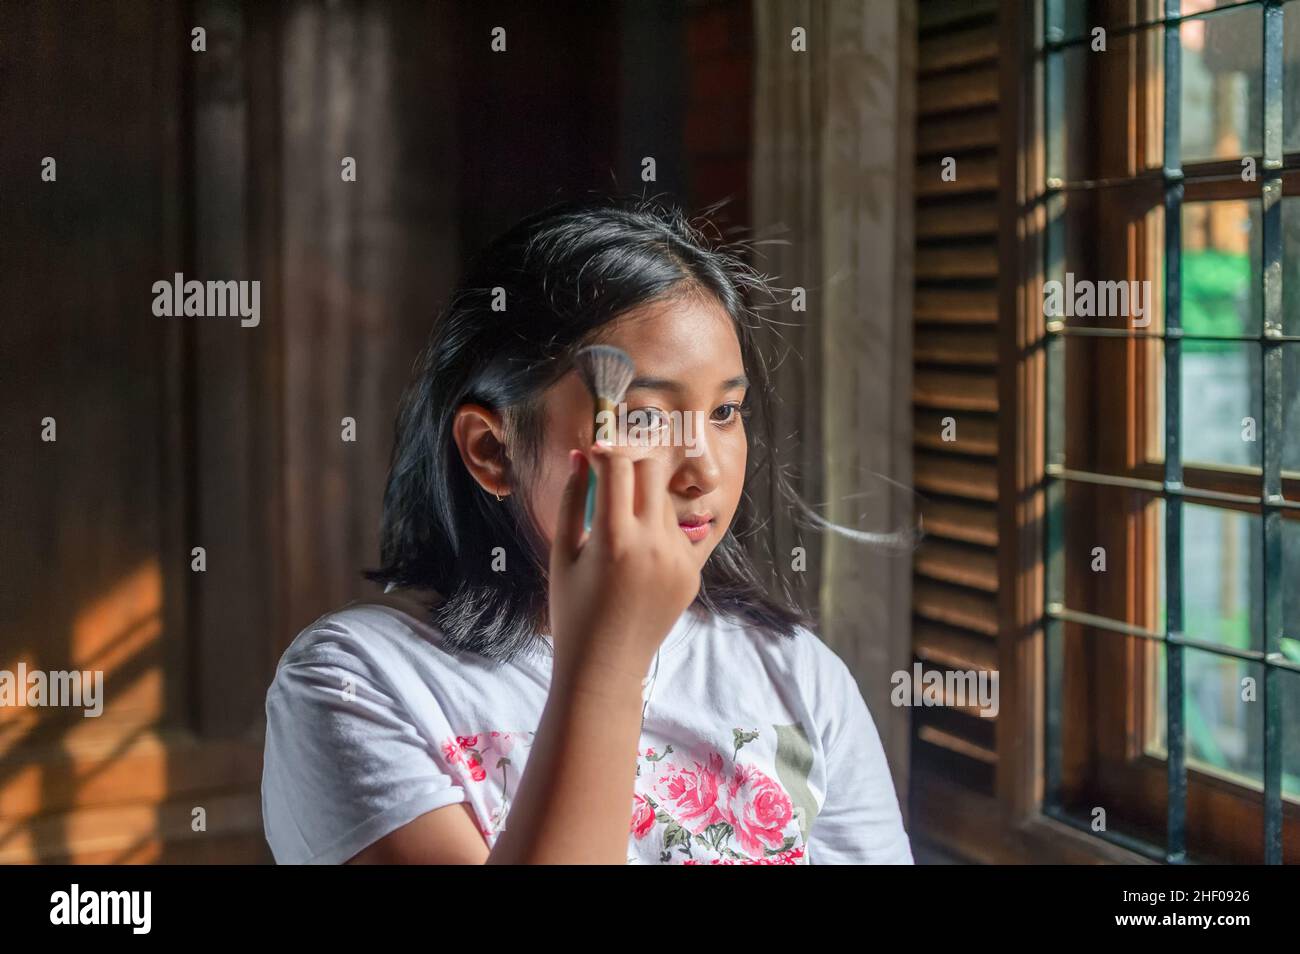 Young girl doing makeup in front of mirror. Stock Photo